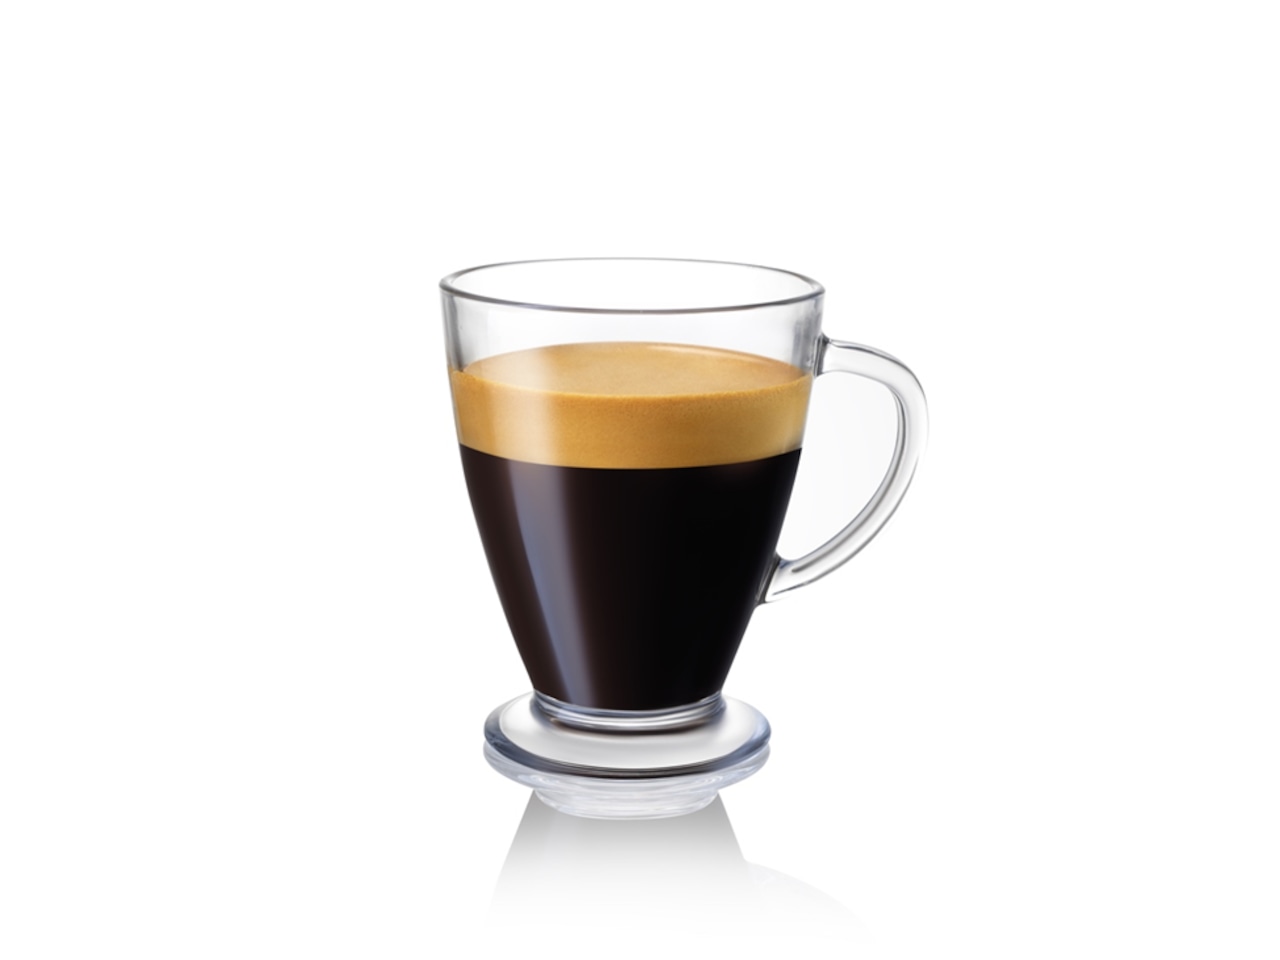 580K glass coffee mugs recalled for burn, laceration risks [Video]